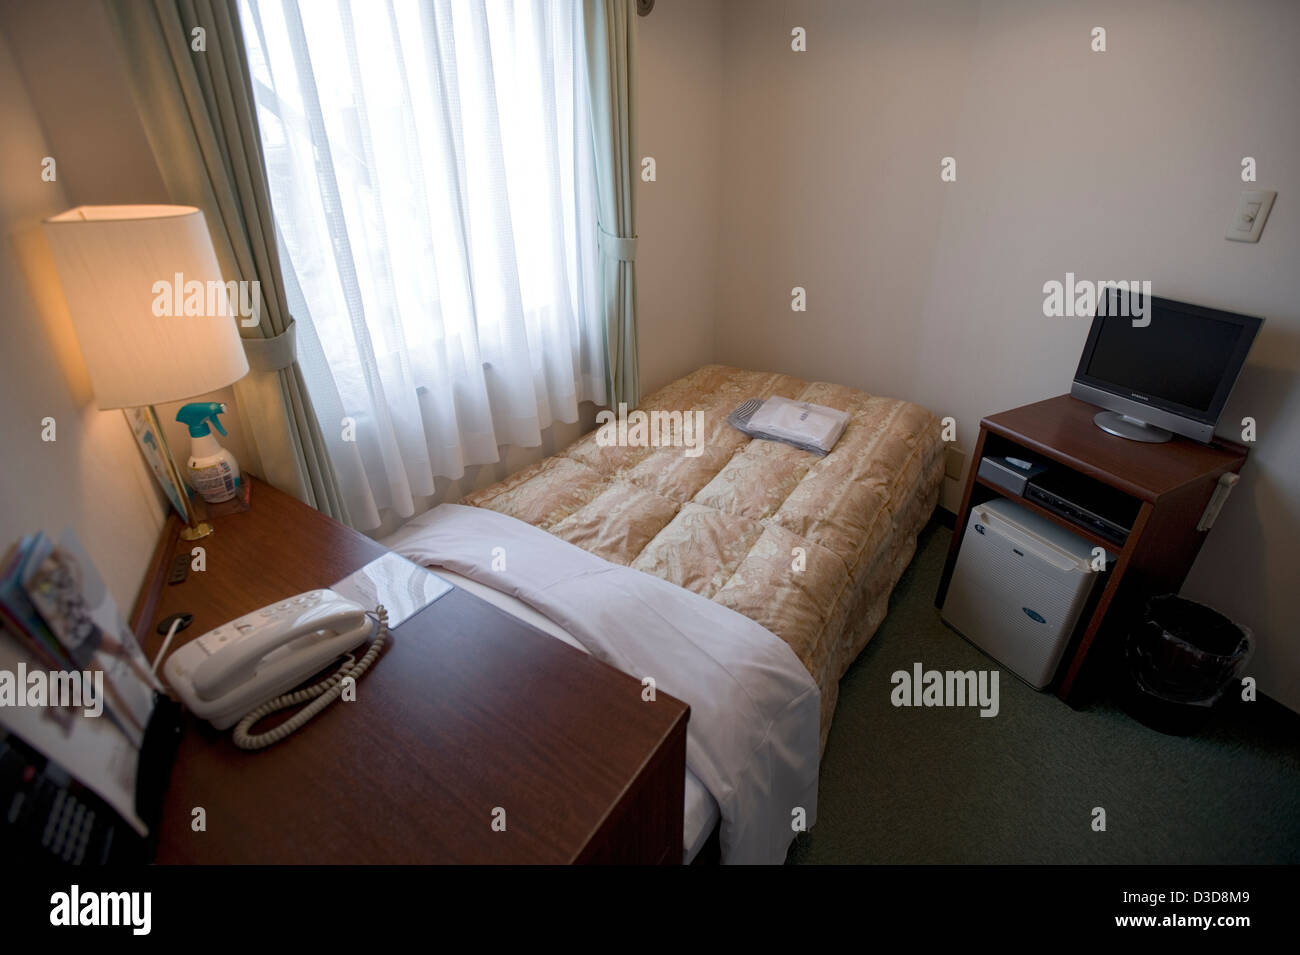 Clean, neat and tidy, a single room at a Japanese business hotel is small by Western standards but very inexpensive and safe. Stock Photo